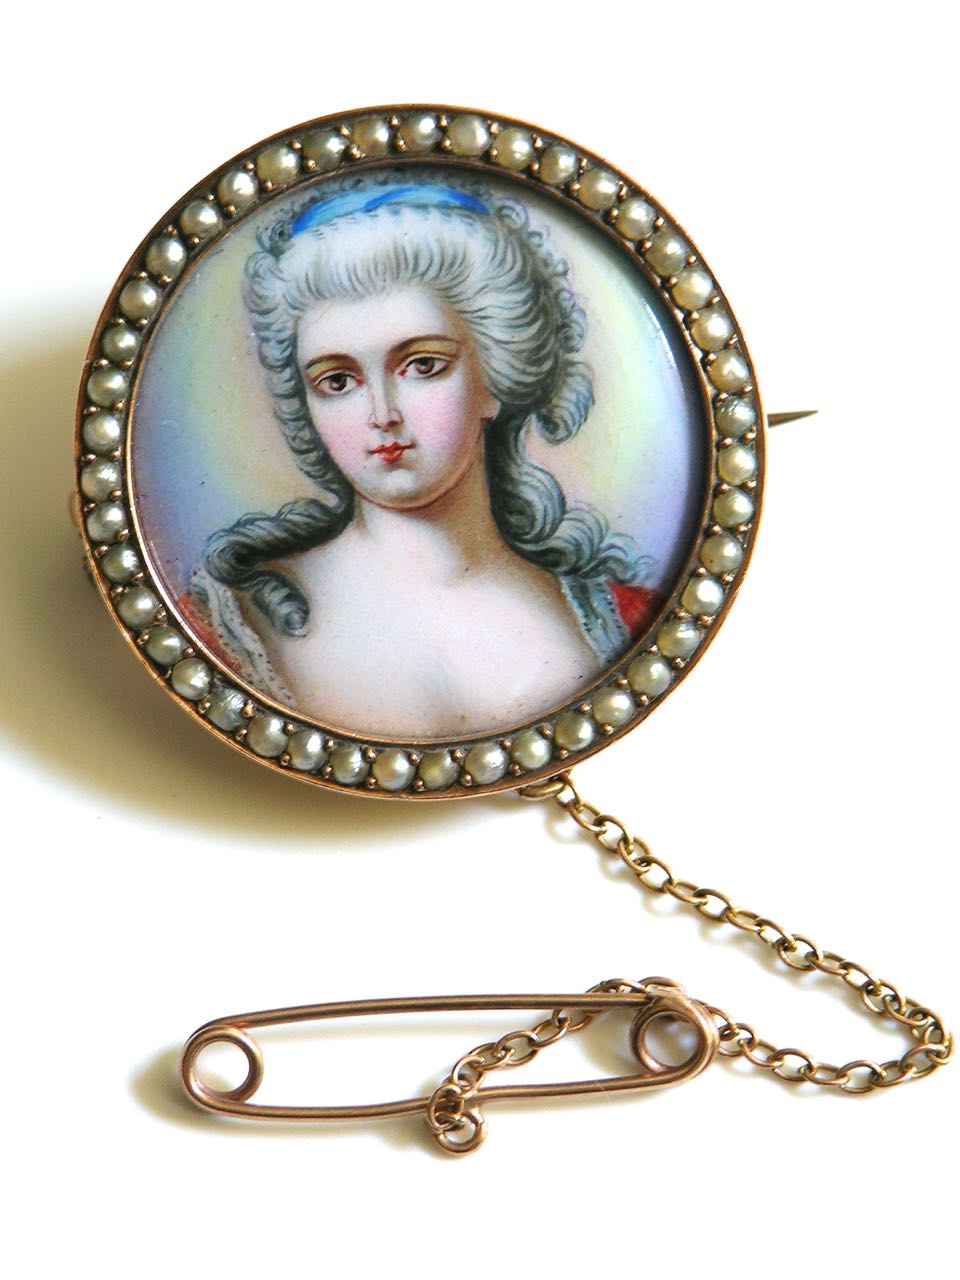 Antique 9k Rose Gold Enamel and Seed Pearl Portrait Miniature Brooch